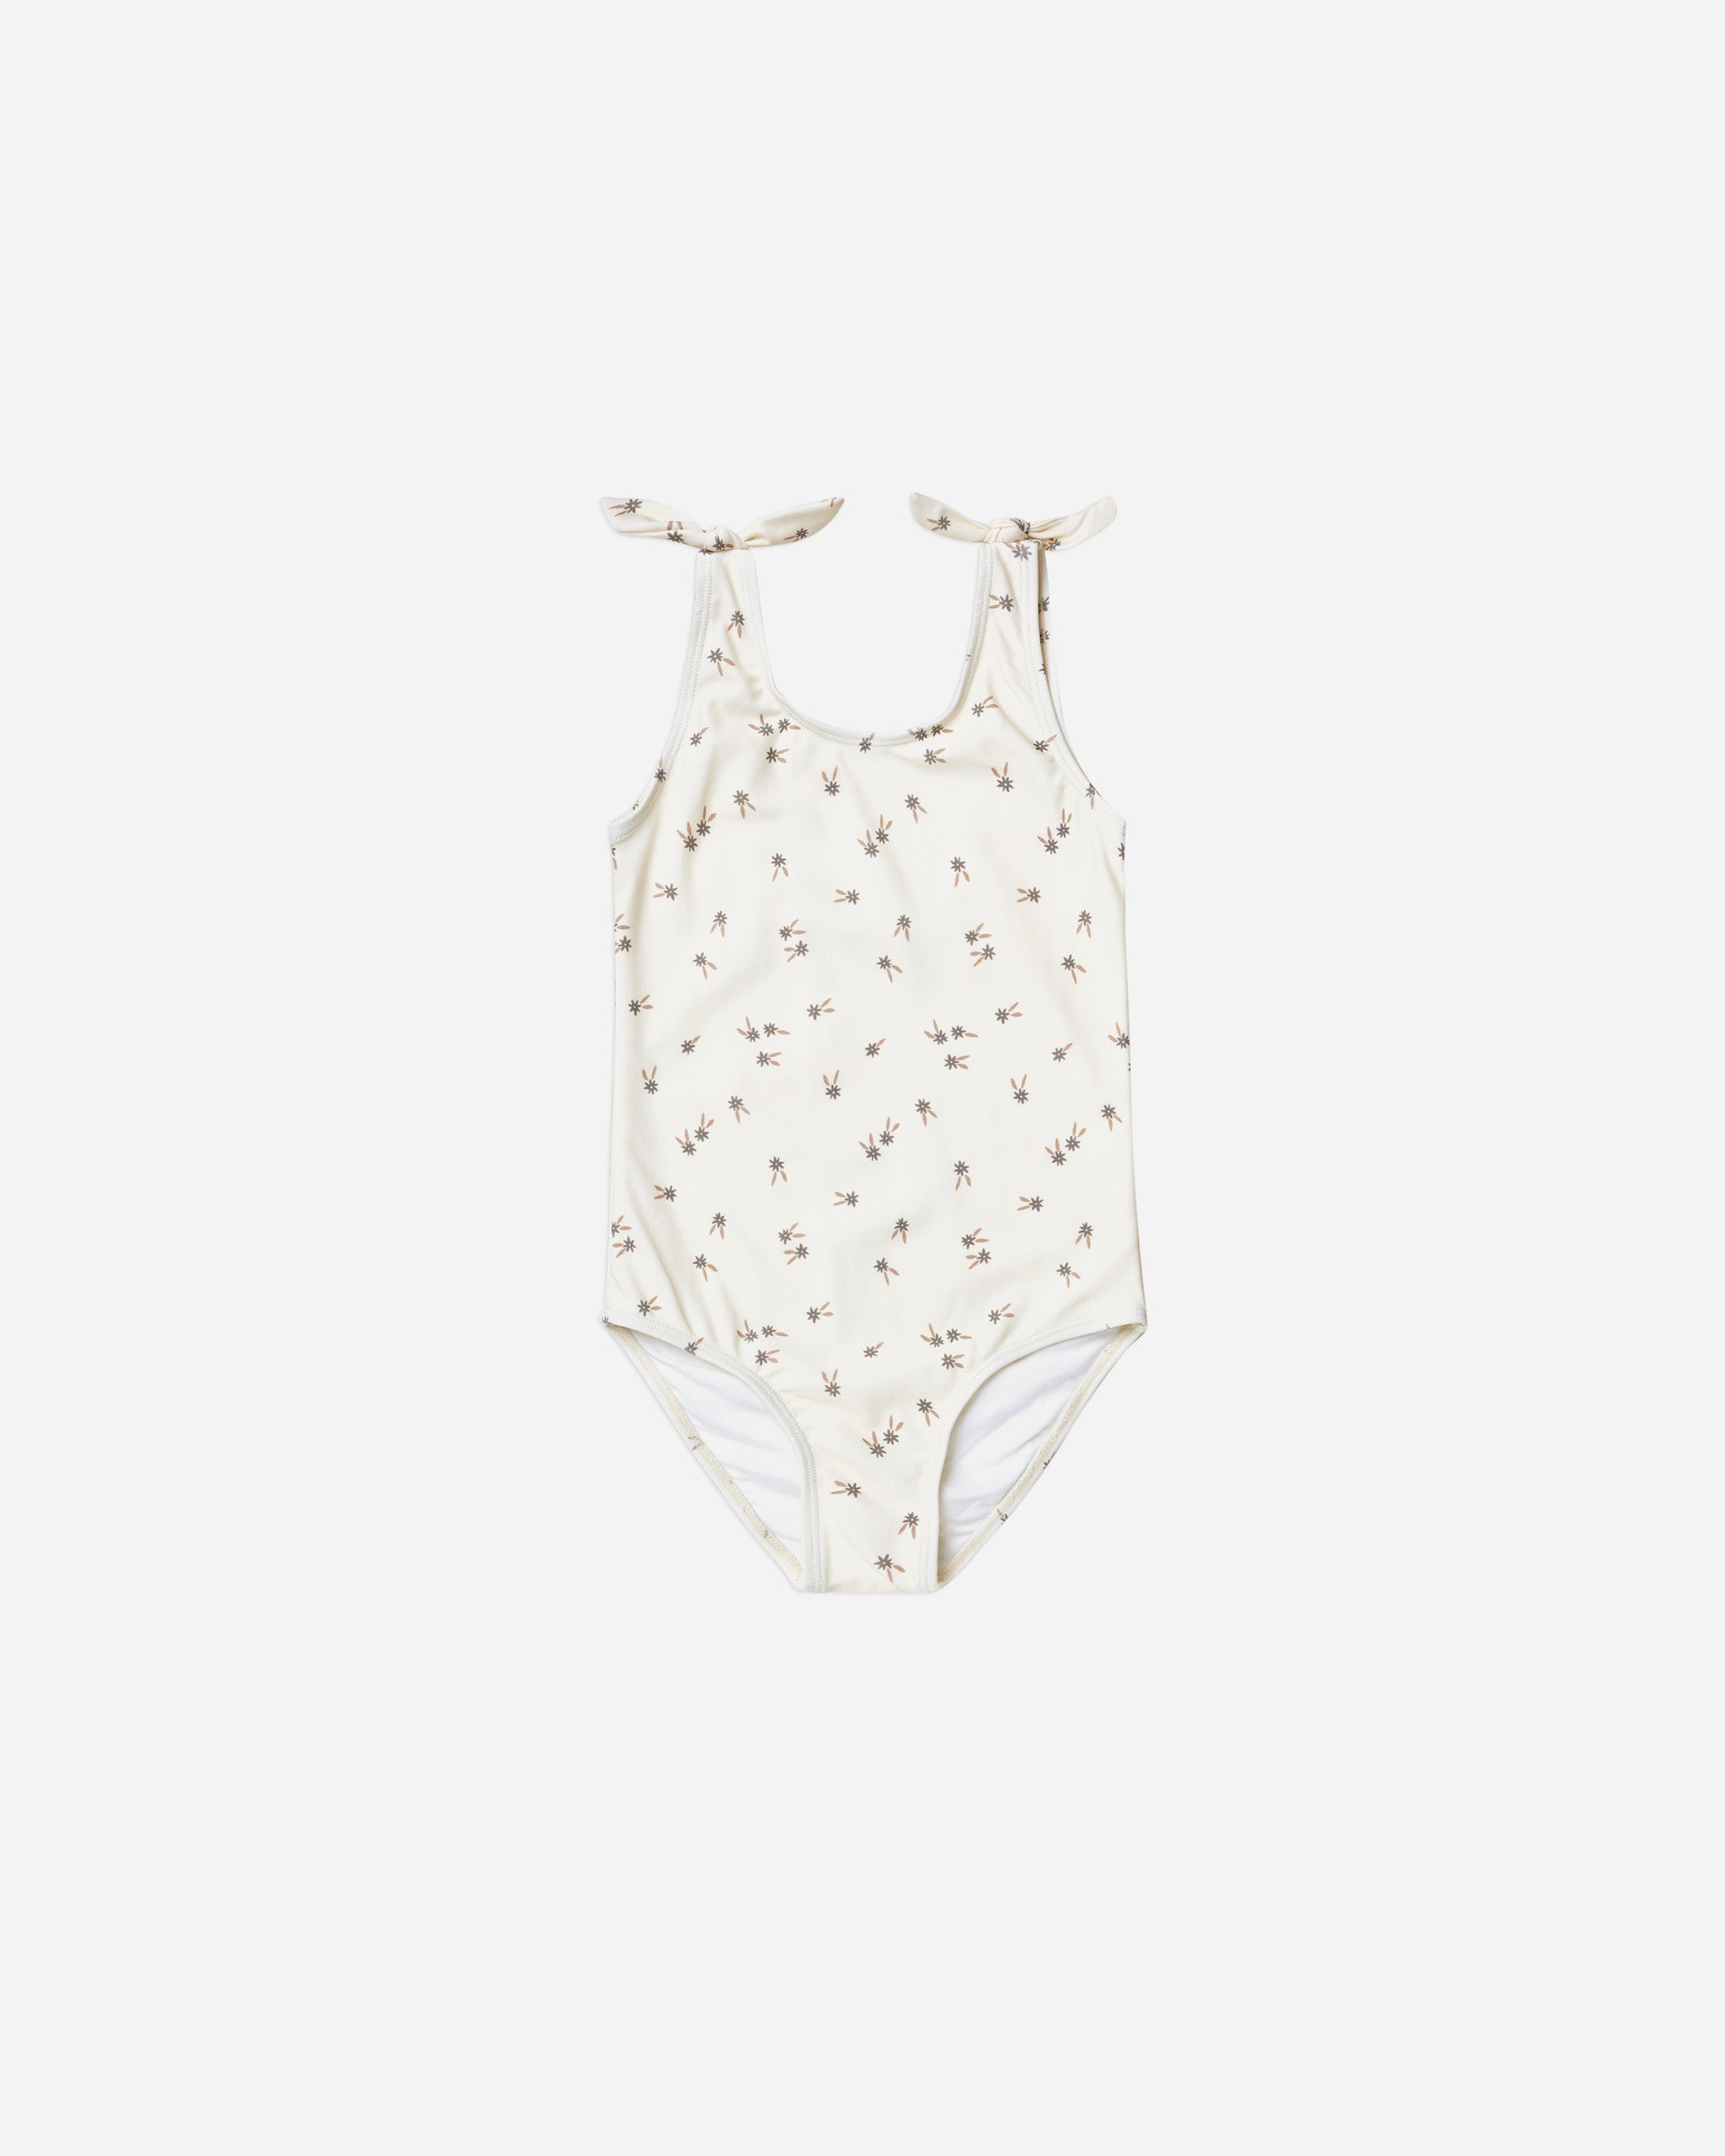 millie one-piece || blue daisy - Rylee + Cru | Kids Clothes | Trendy Baby Clothes | Modern Infant Outfits |